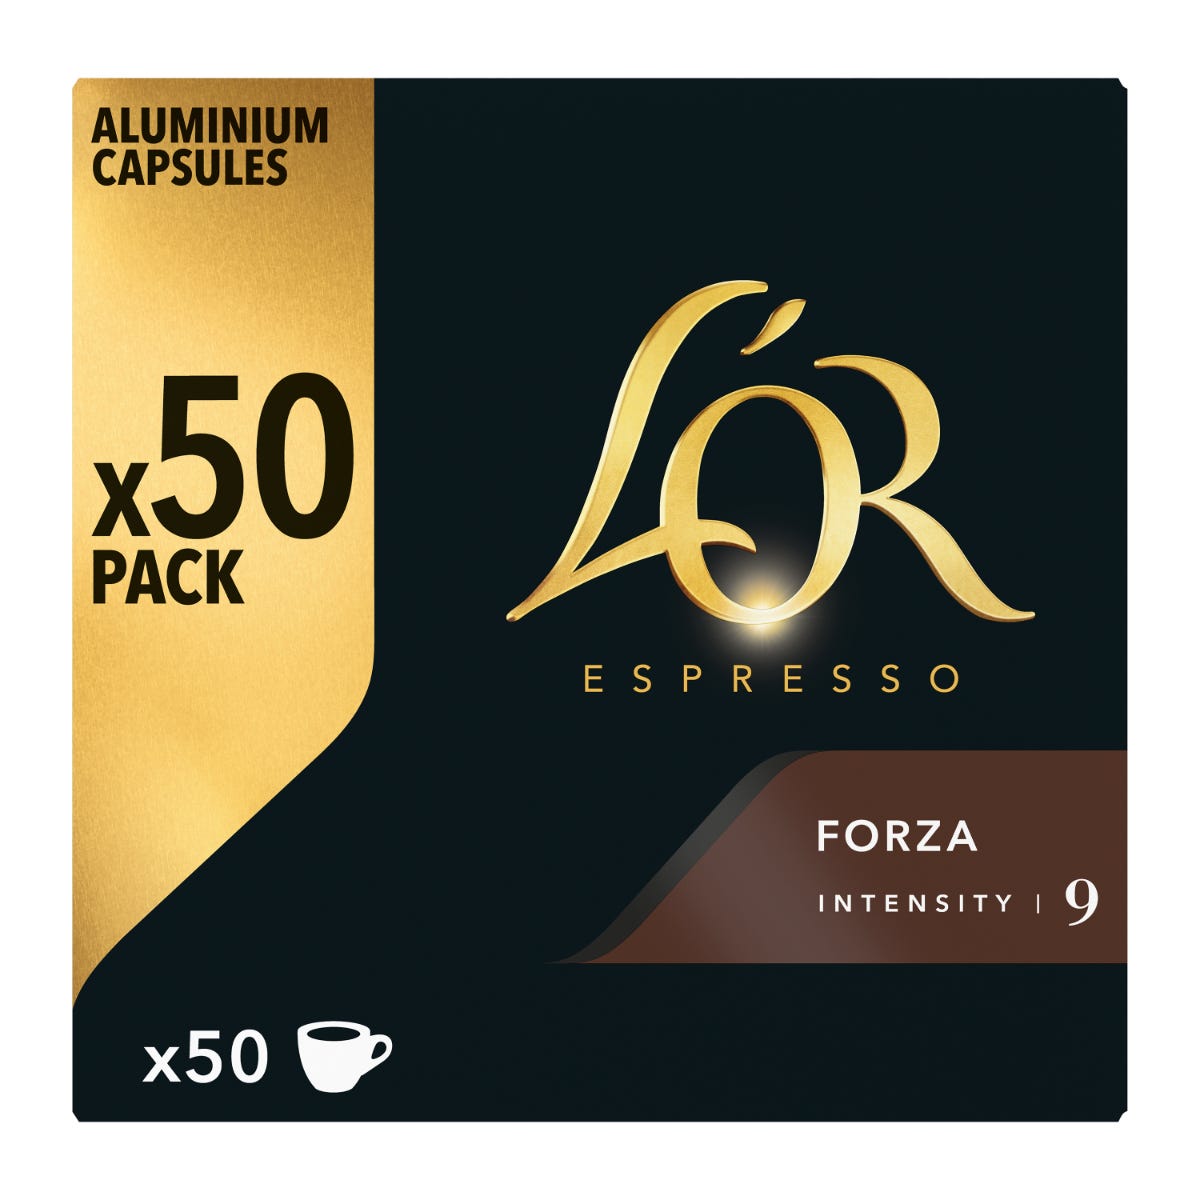 Maxi pack Forza x50